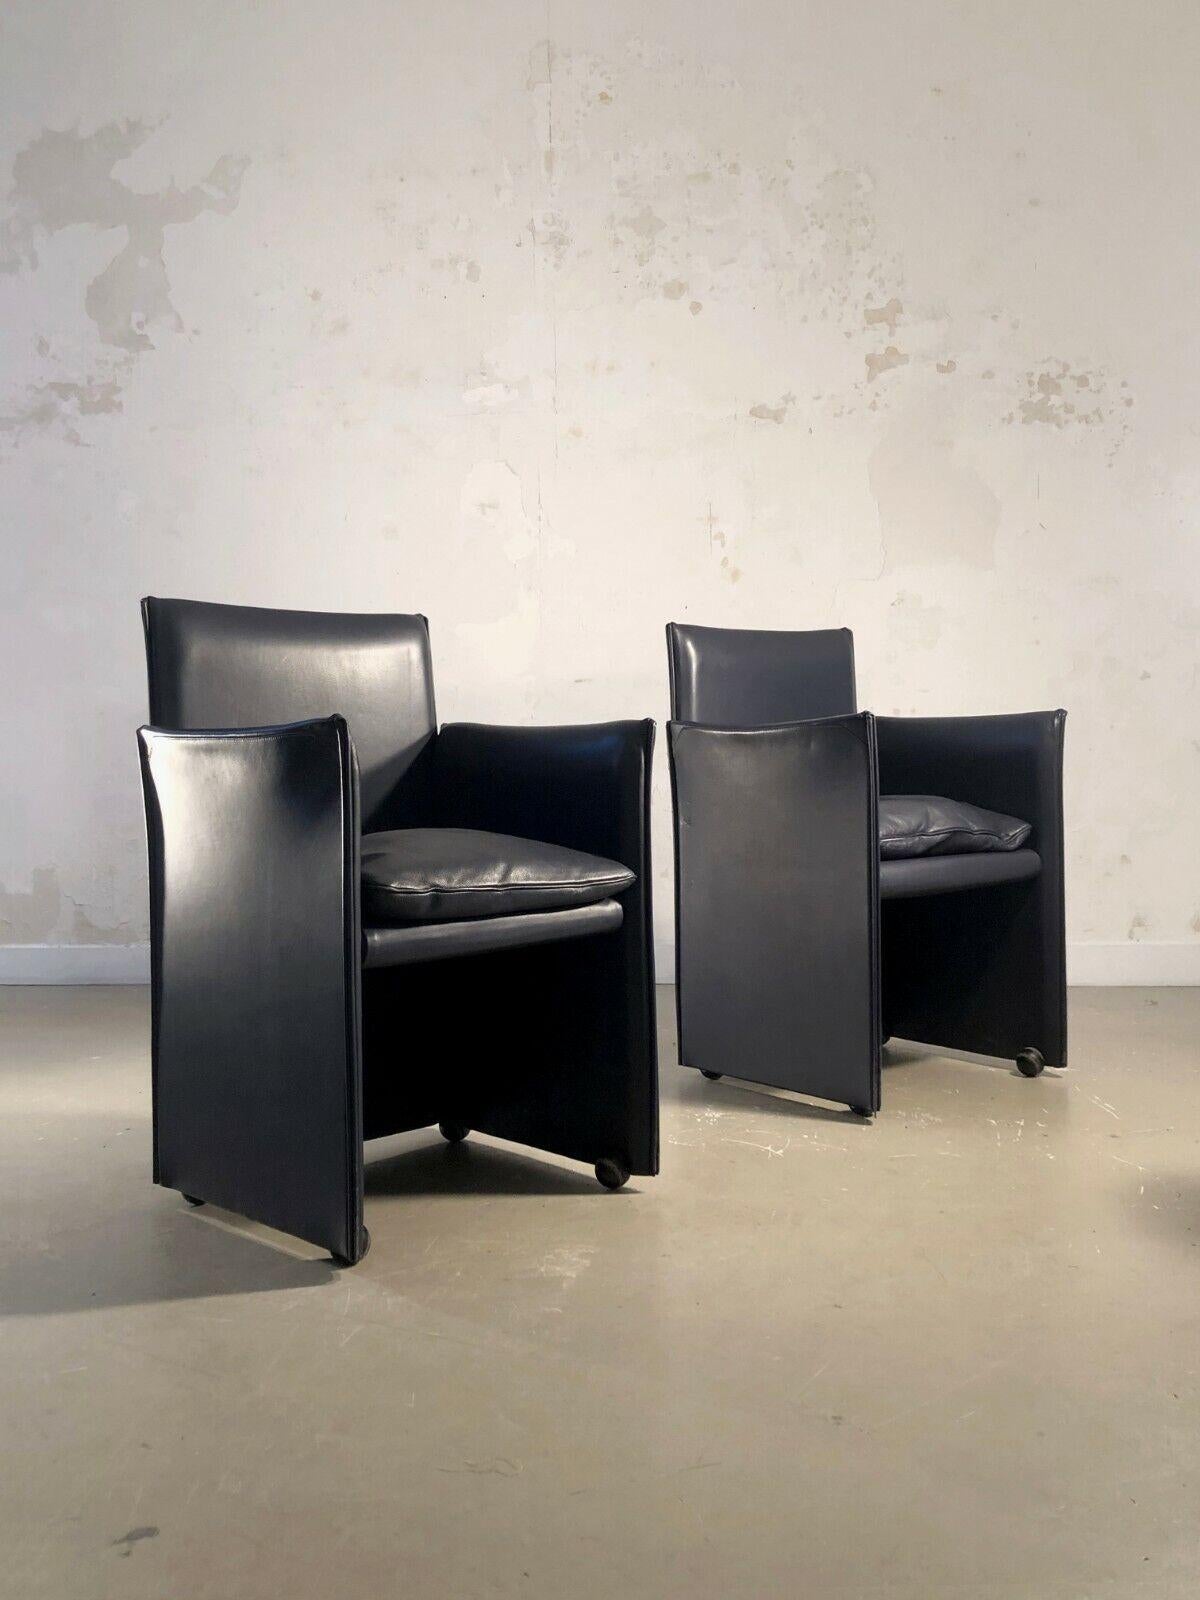 A Pair of Break 401 POST-MODERN CHAIRS by MARIO BELLINI, CASSINA ed. Italy 1970 For Sale 1